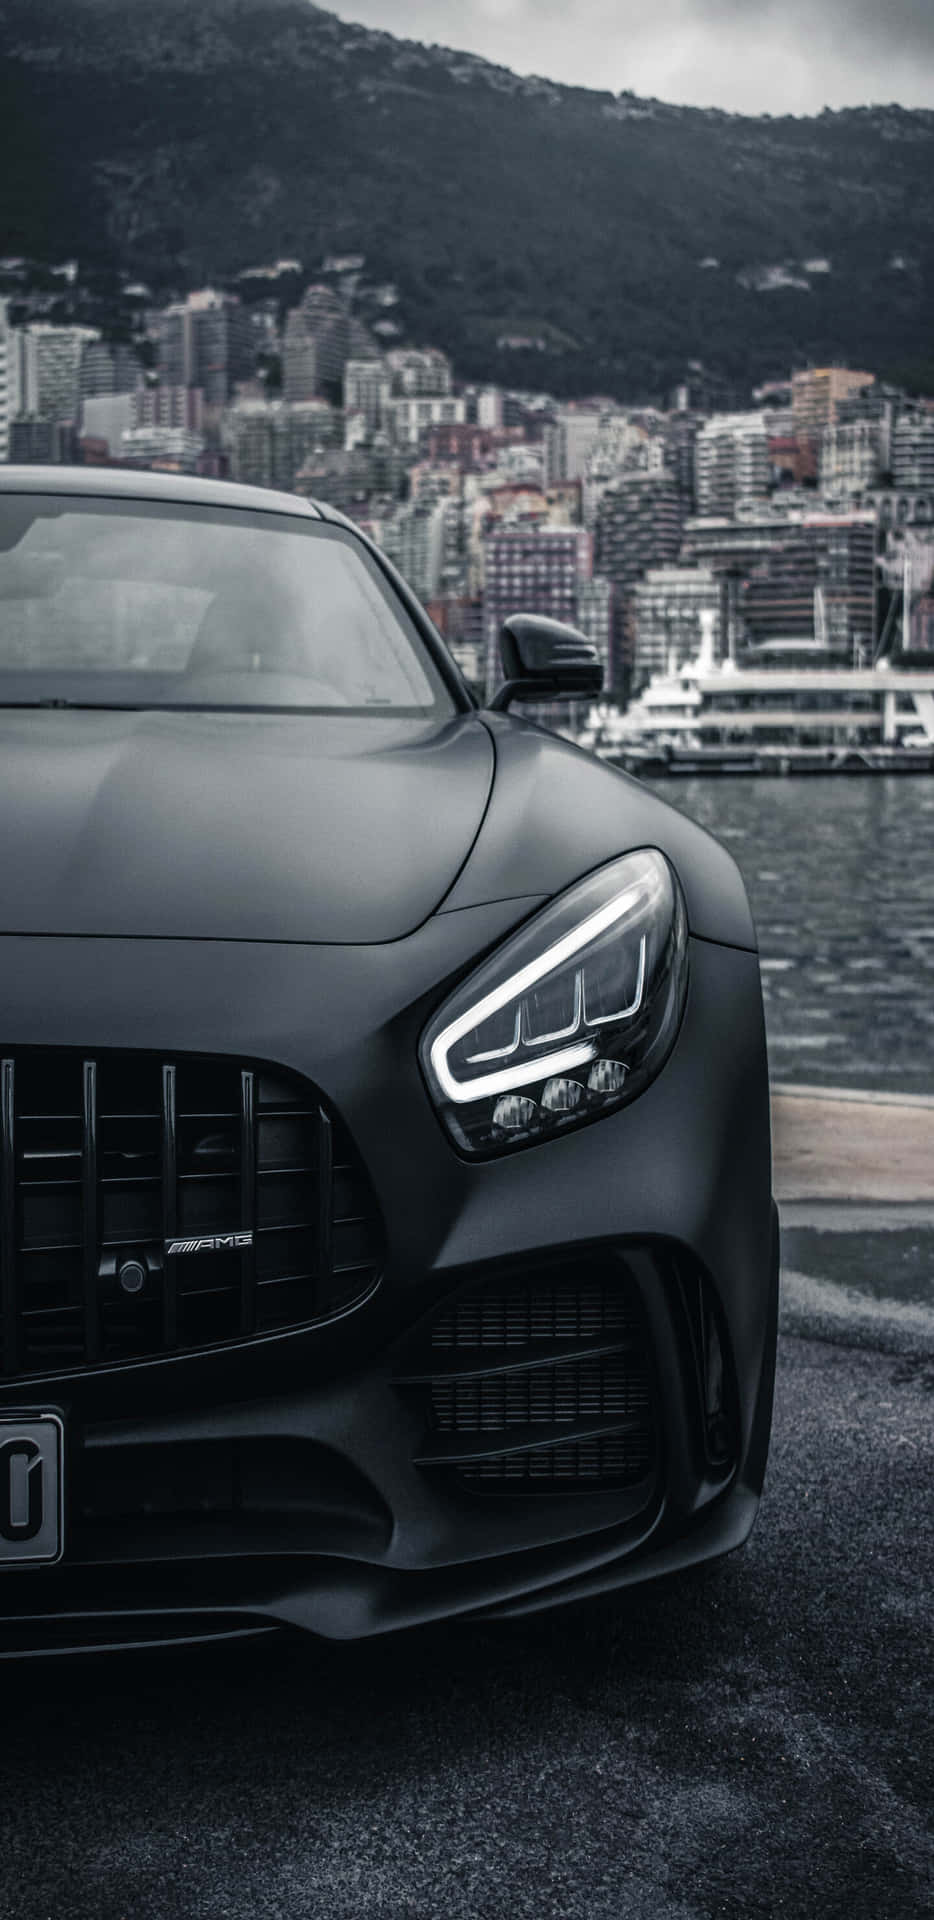 Caption: Exquisite Pixel 3XL Background featuring AMG GT-R